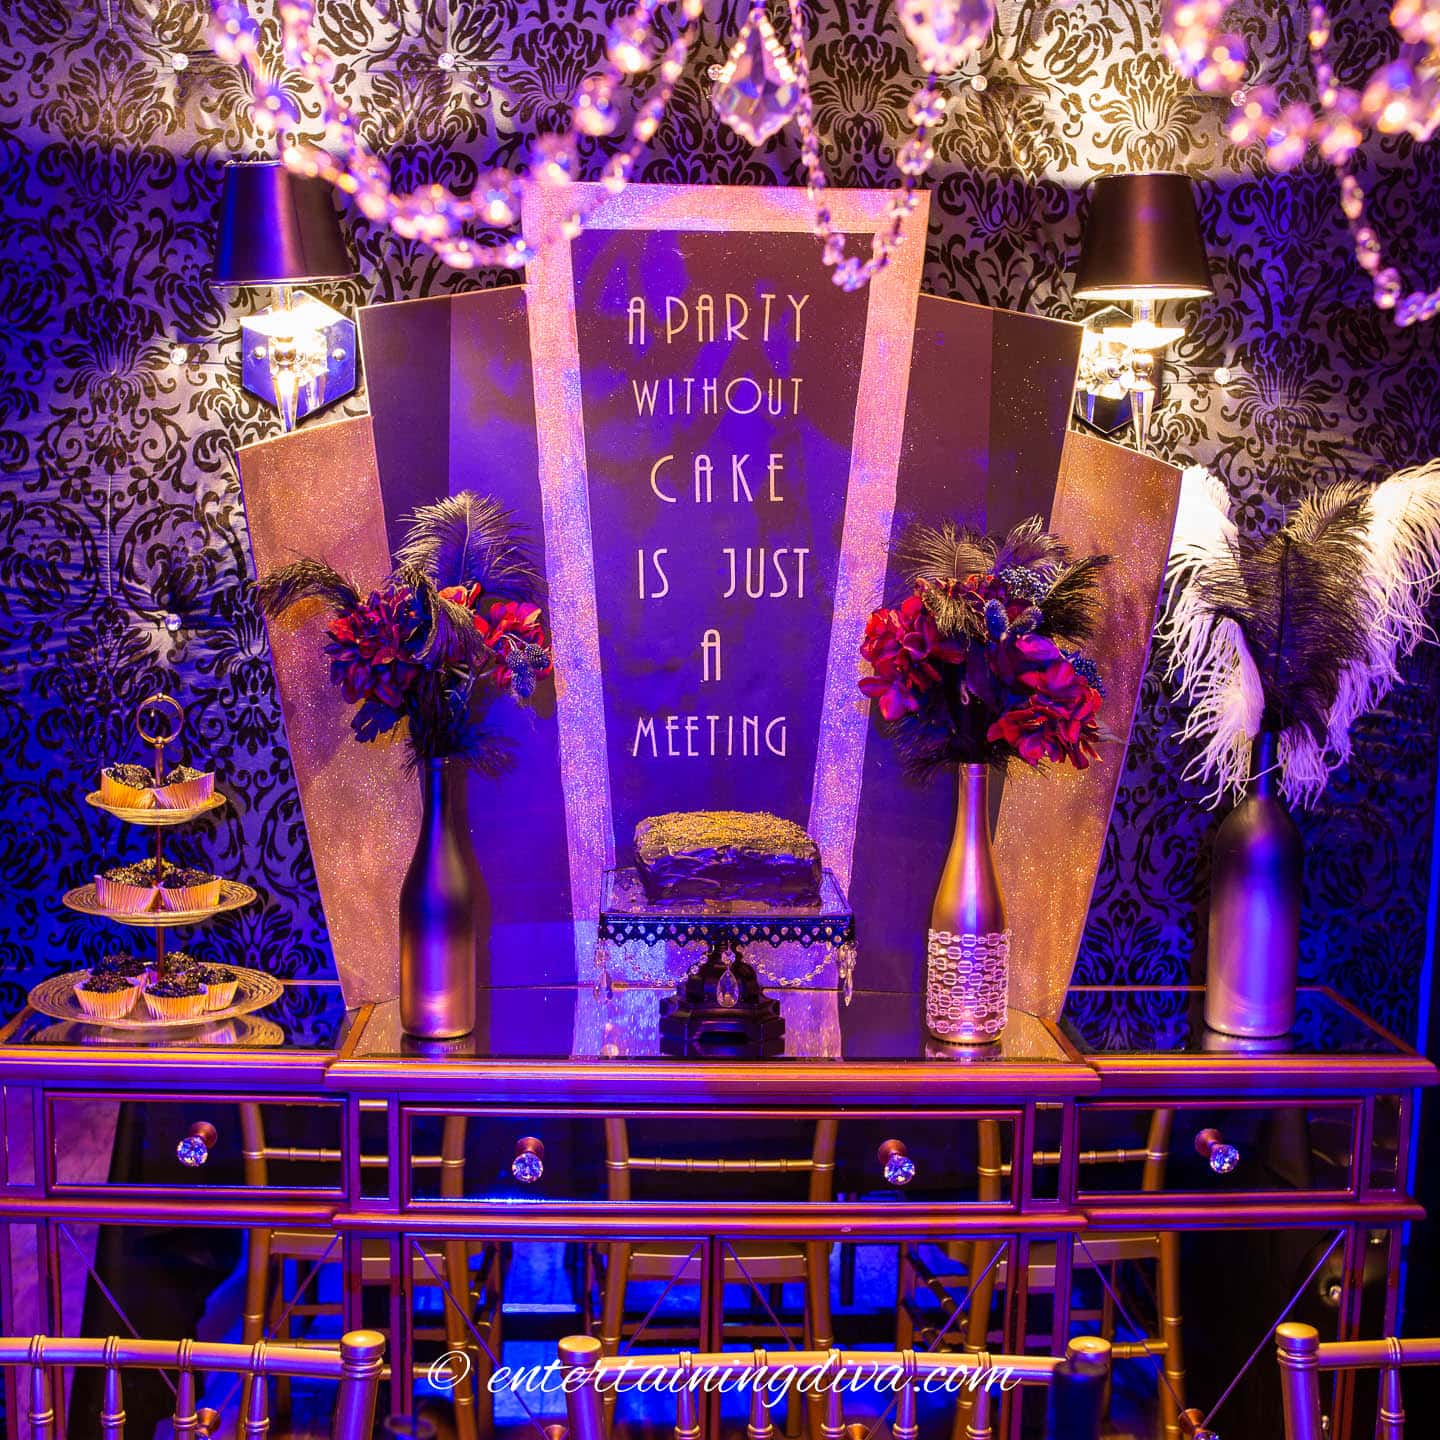 A Great Gatsby themed dessert table with cake, cupcakes and wine bottle vases with flowers and ostrich feathers